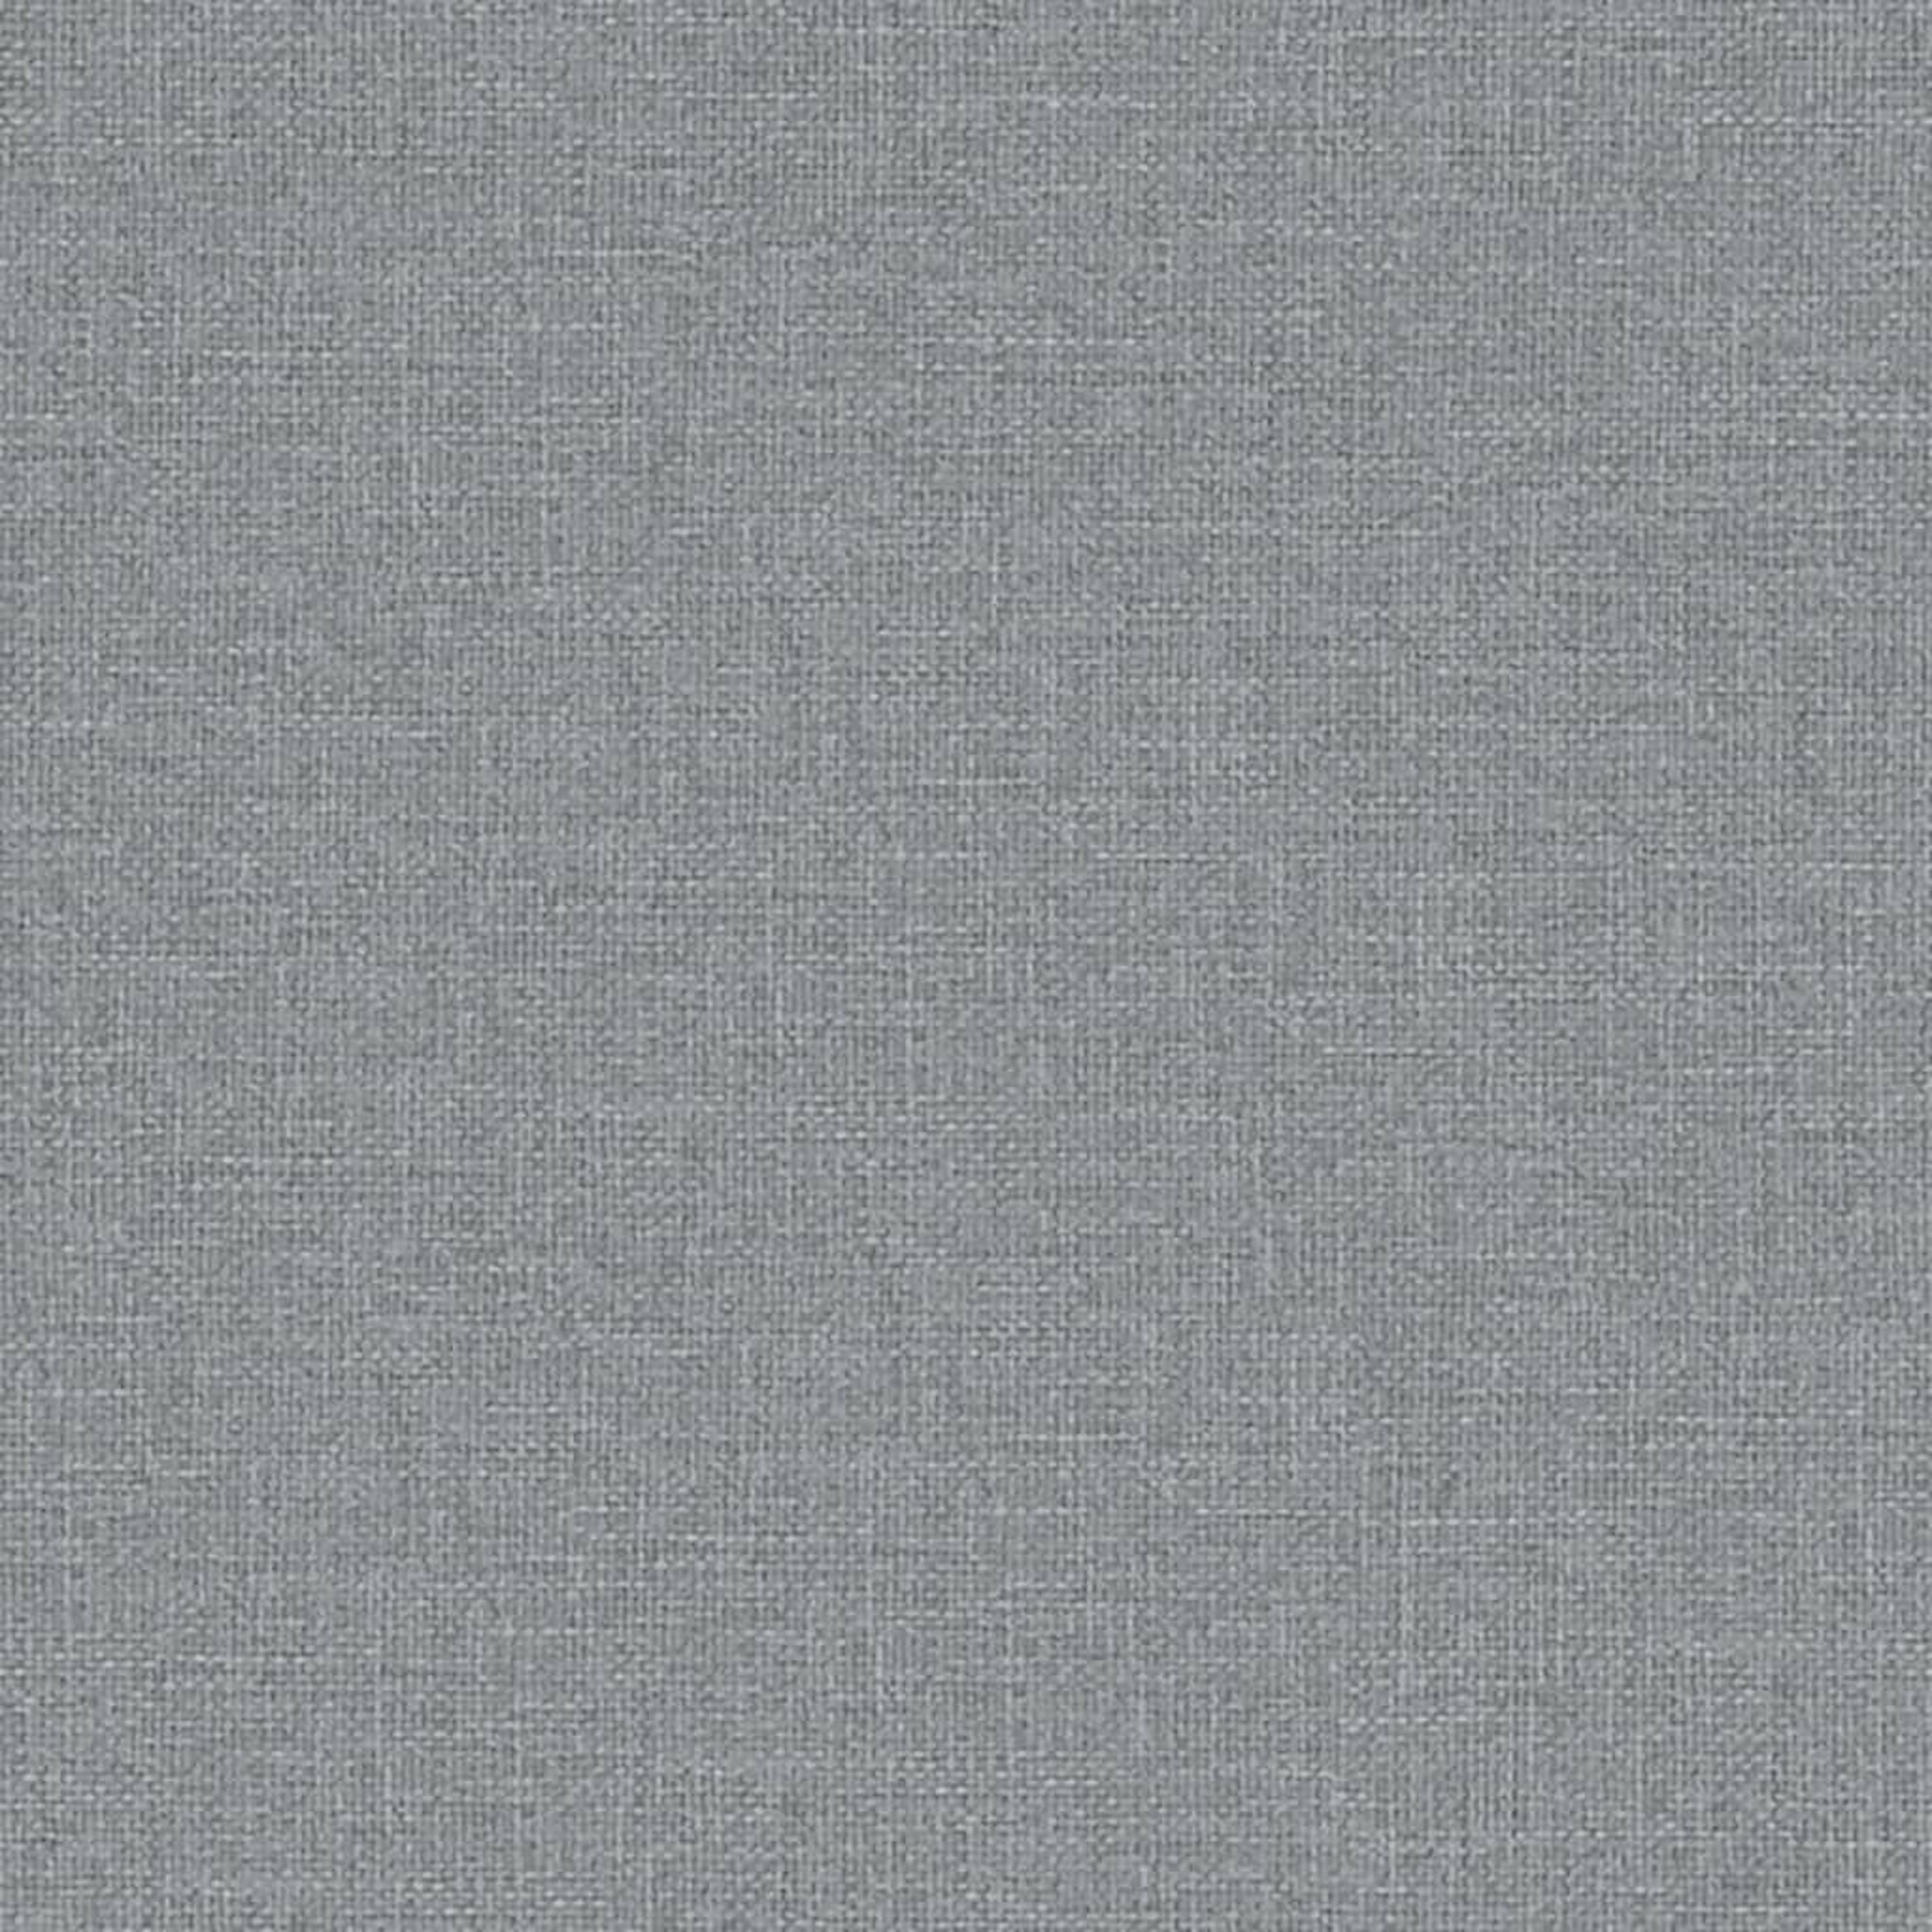 Selected Color is Light gray